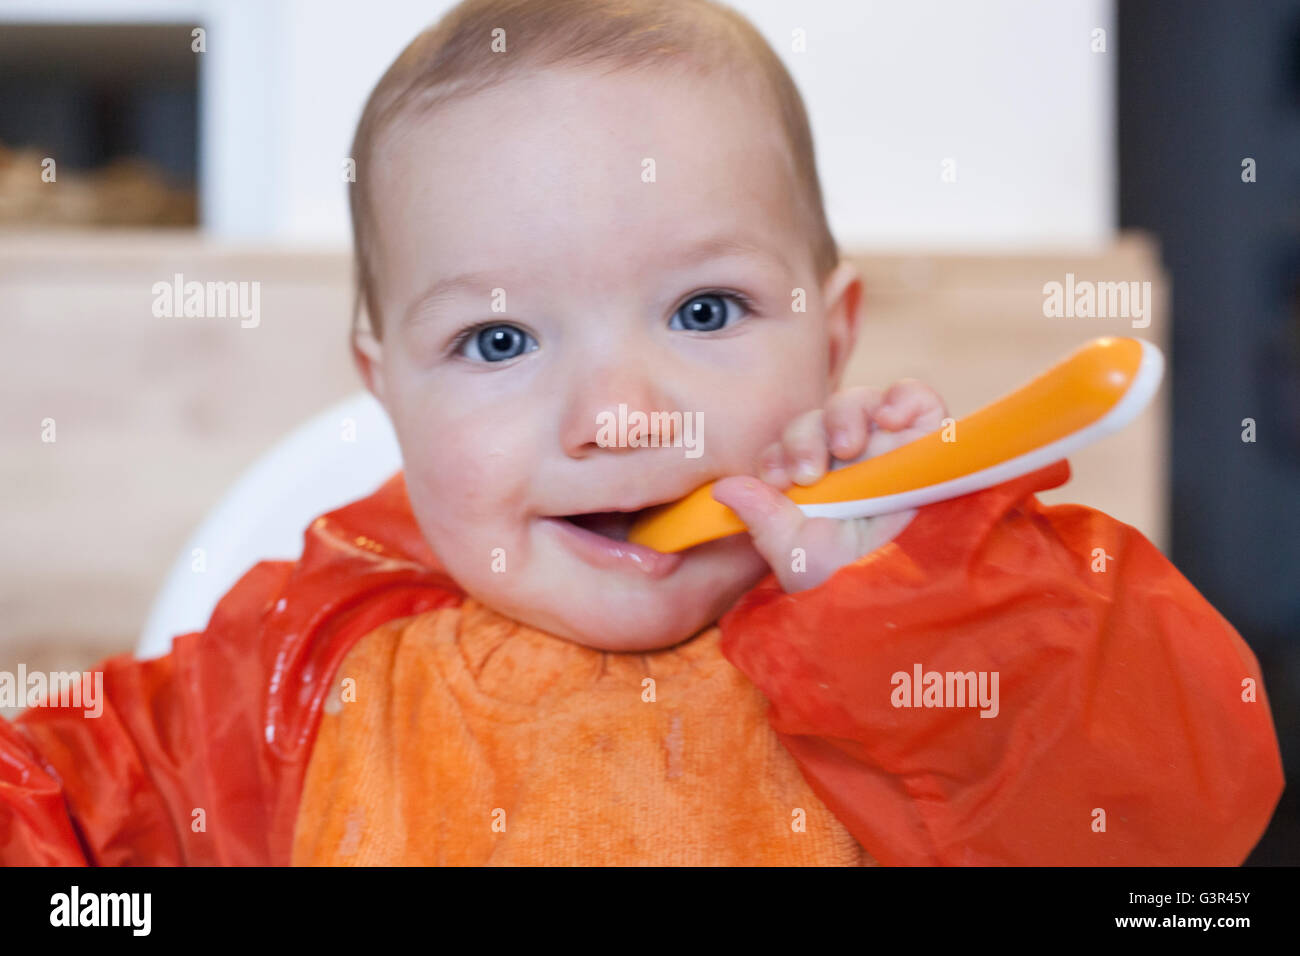 8 month baby boy having his cereal mush. He is wearing an orange bib. Trying to eat independently Stock Photo